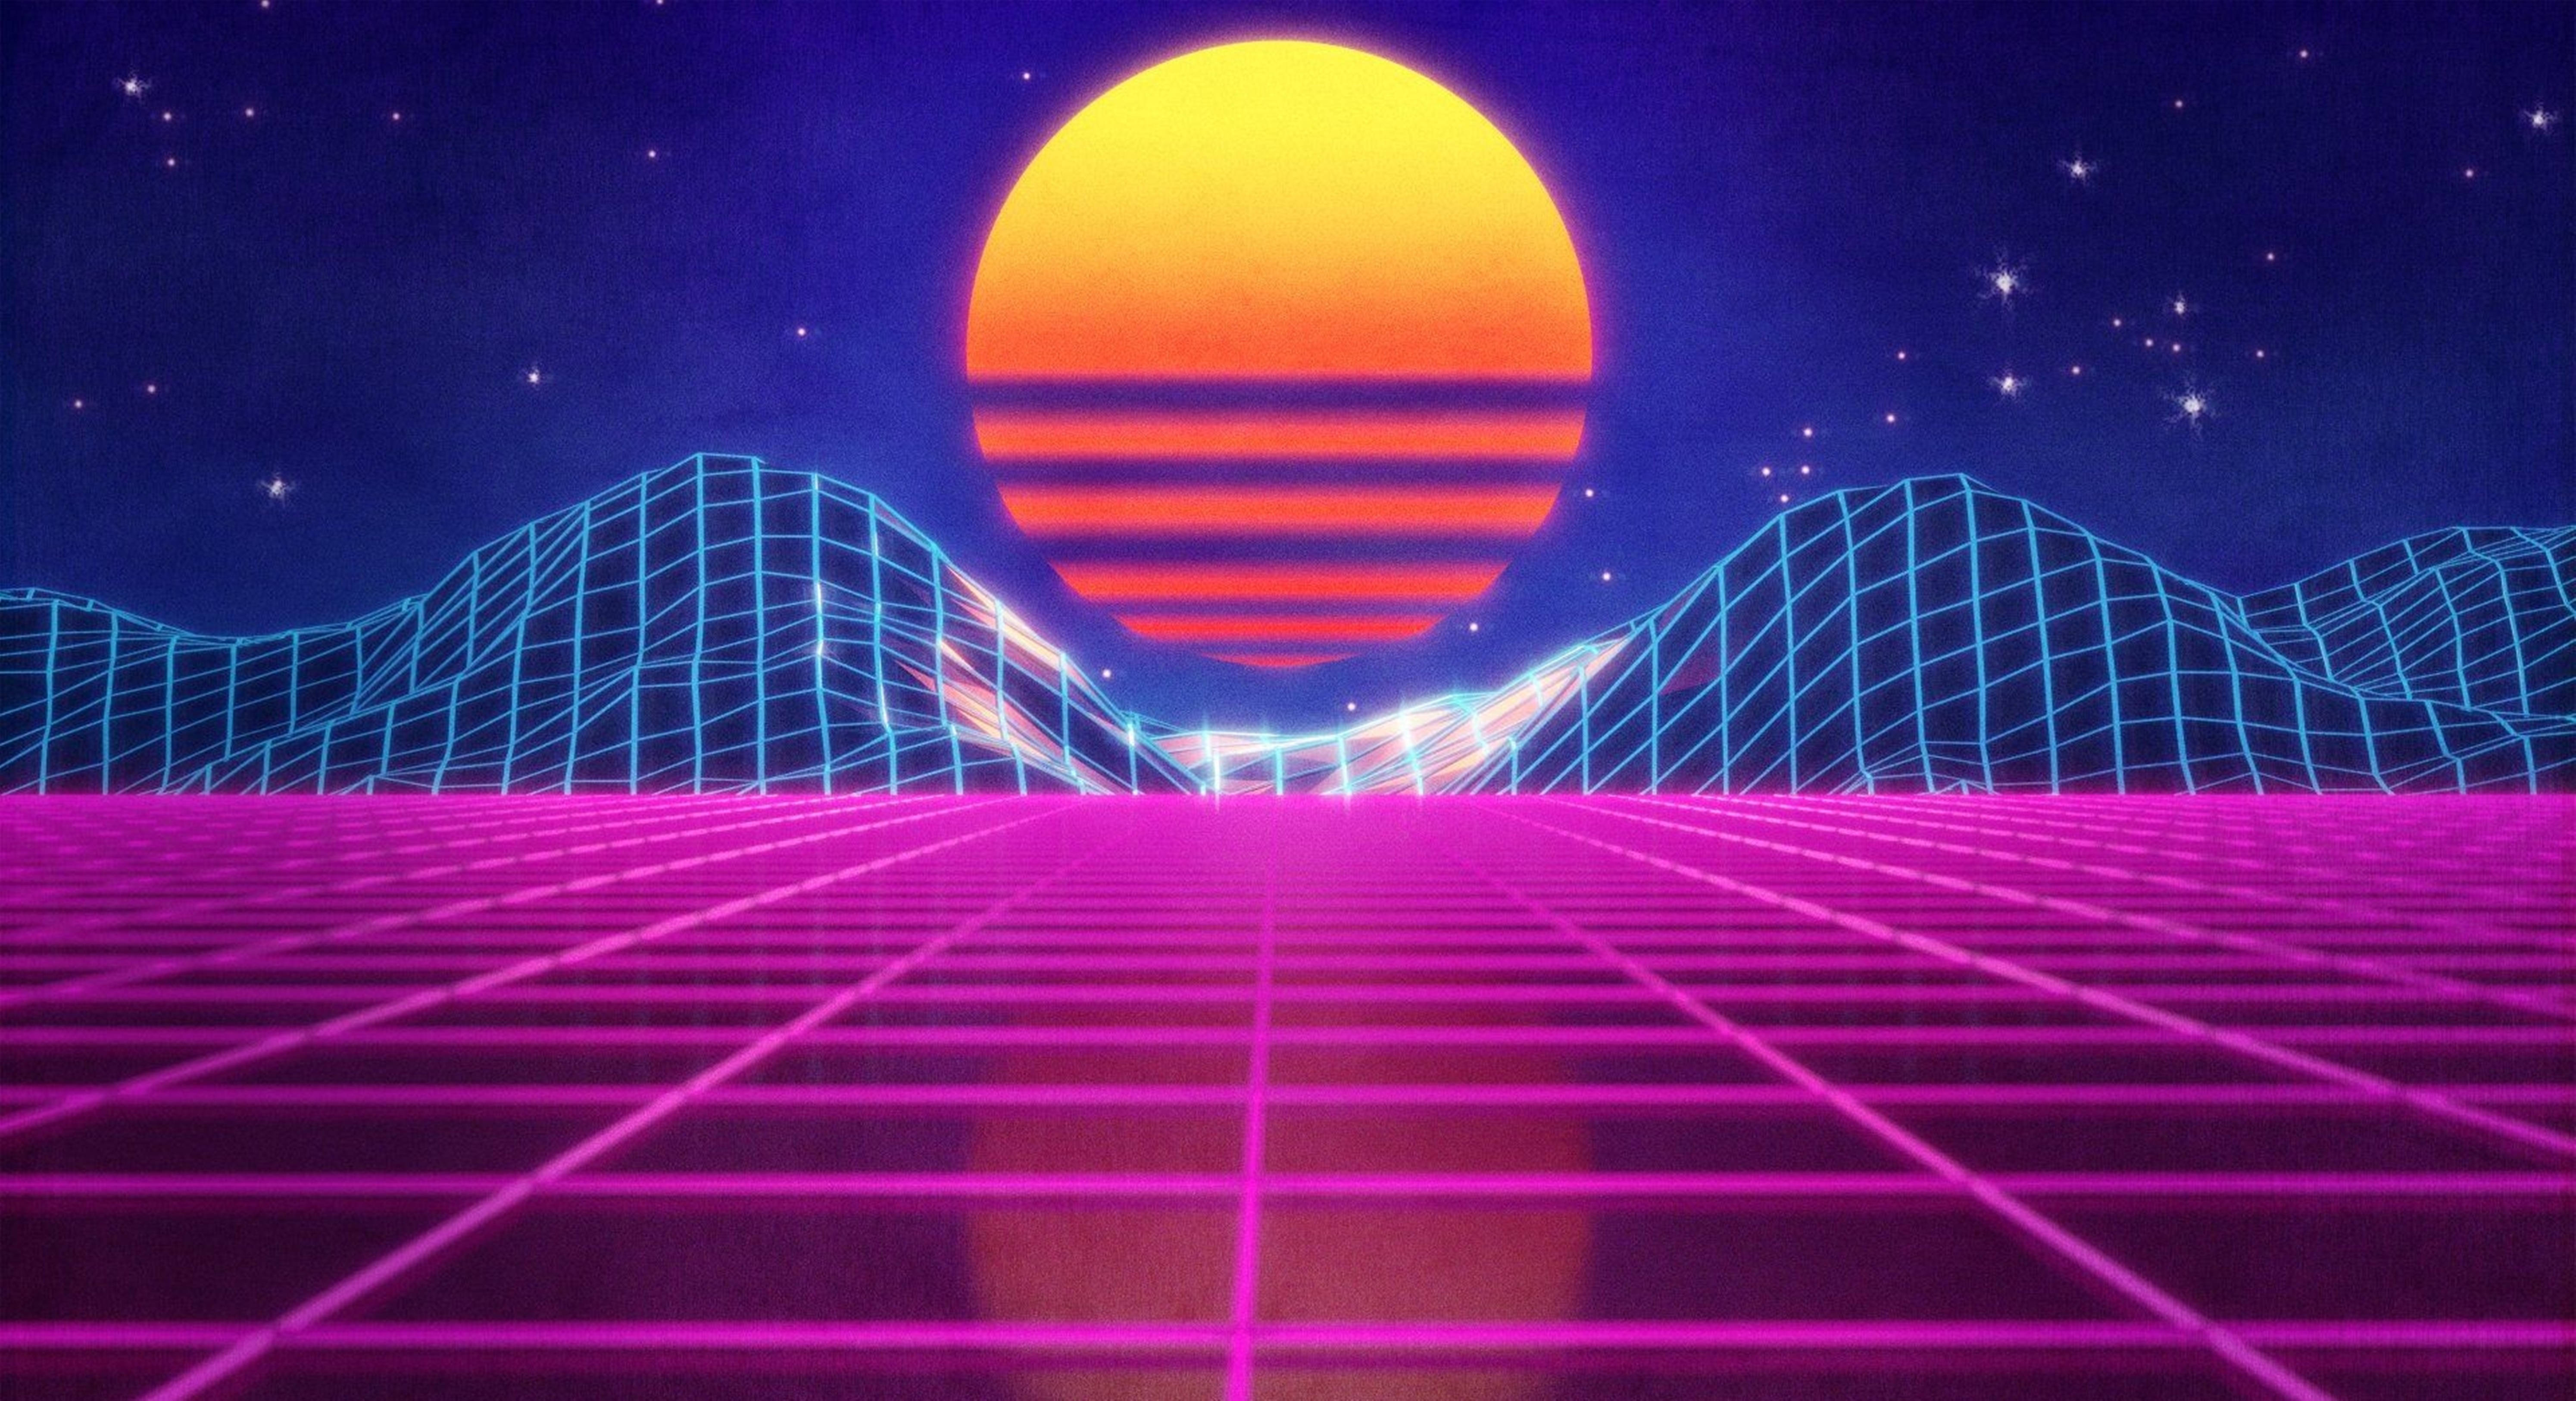 Retrowave Neon Grid Field And Mountain 4k